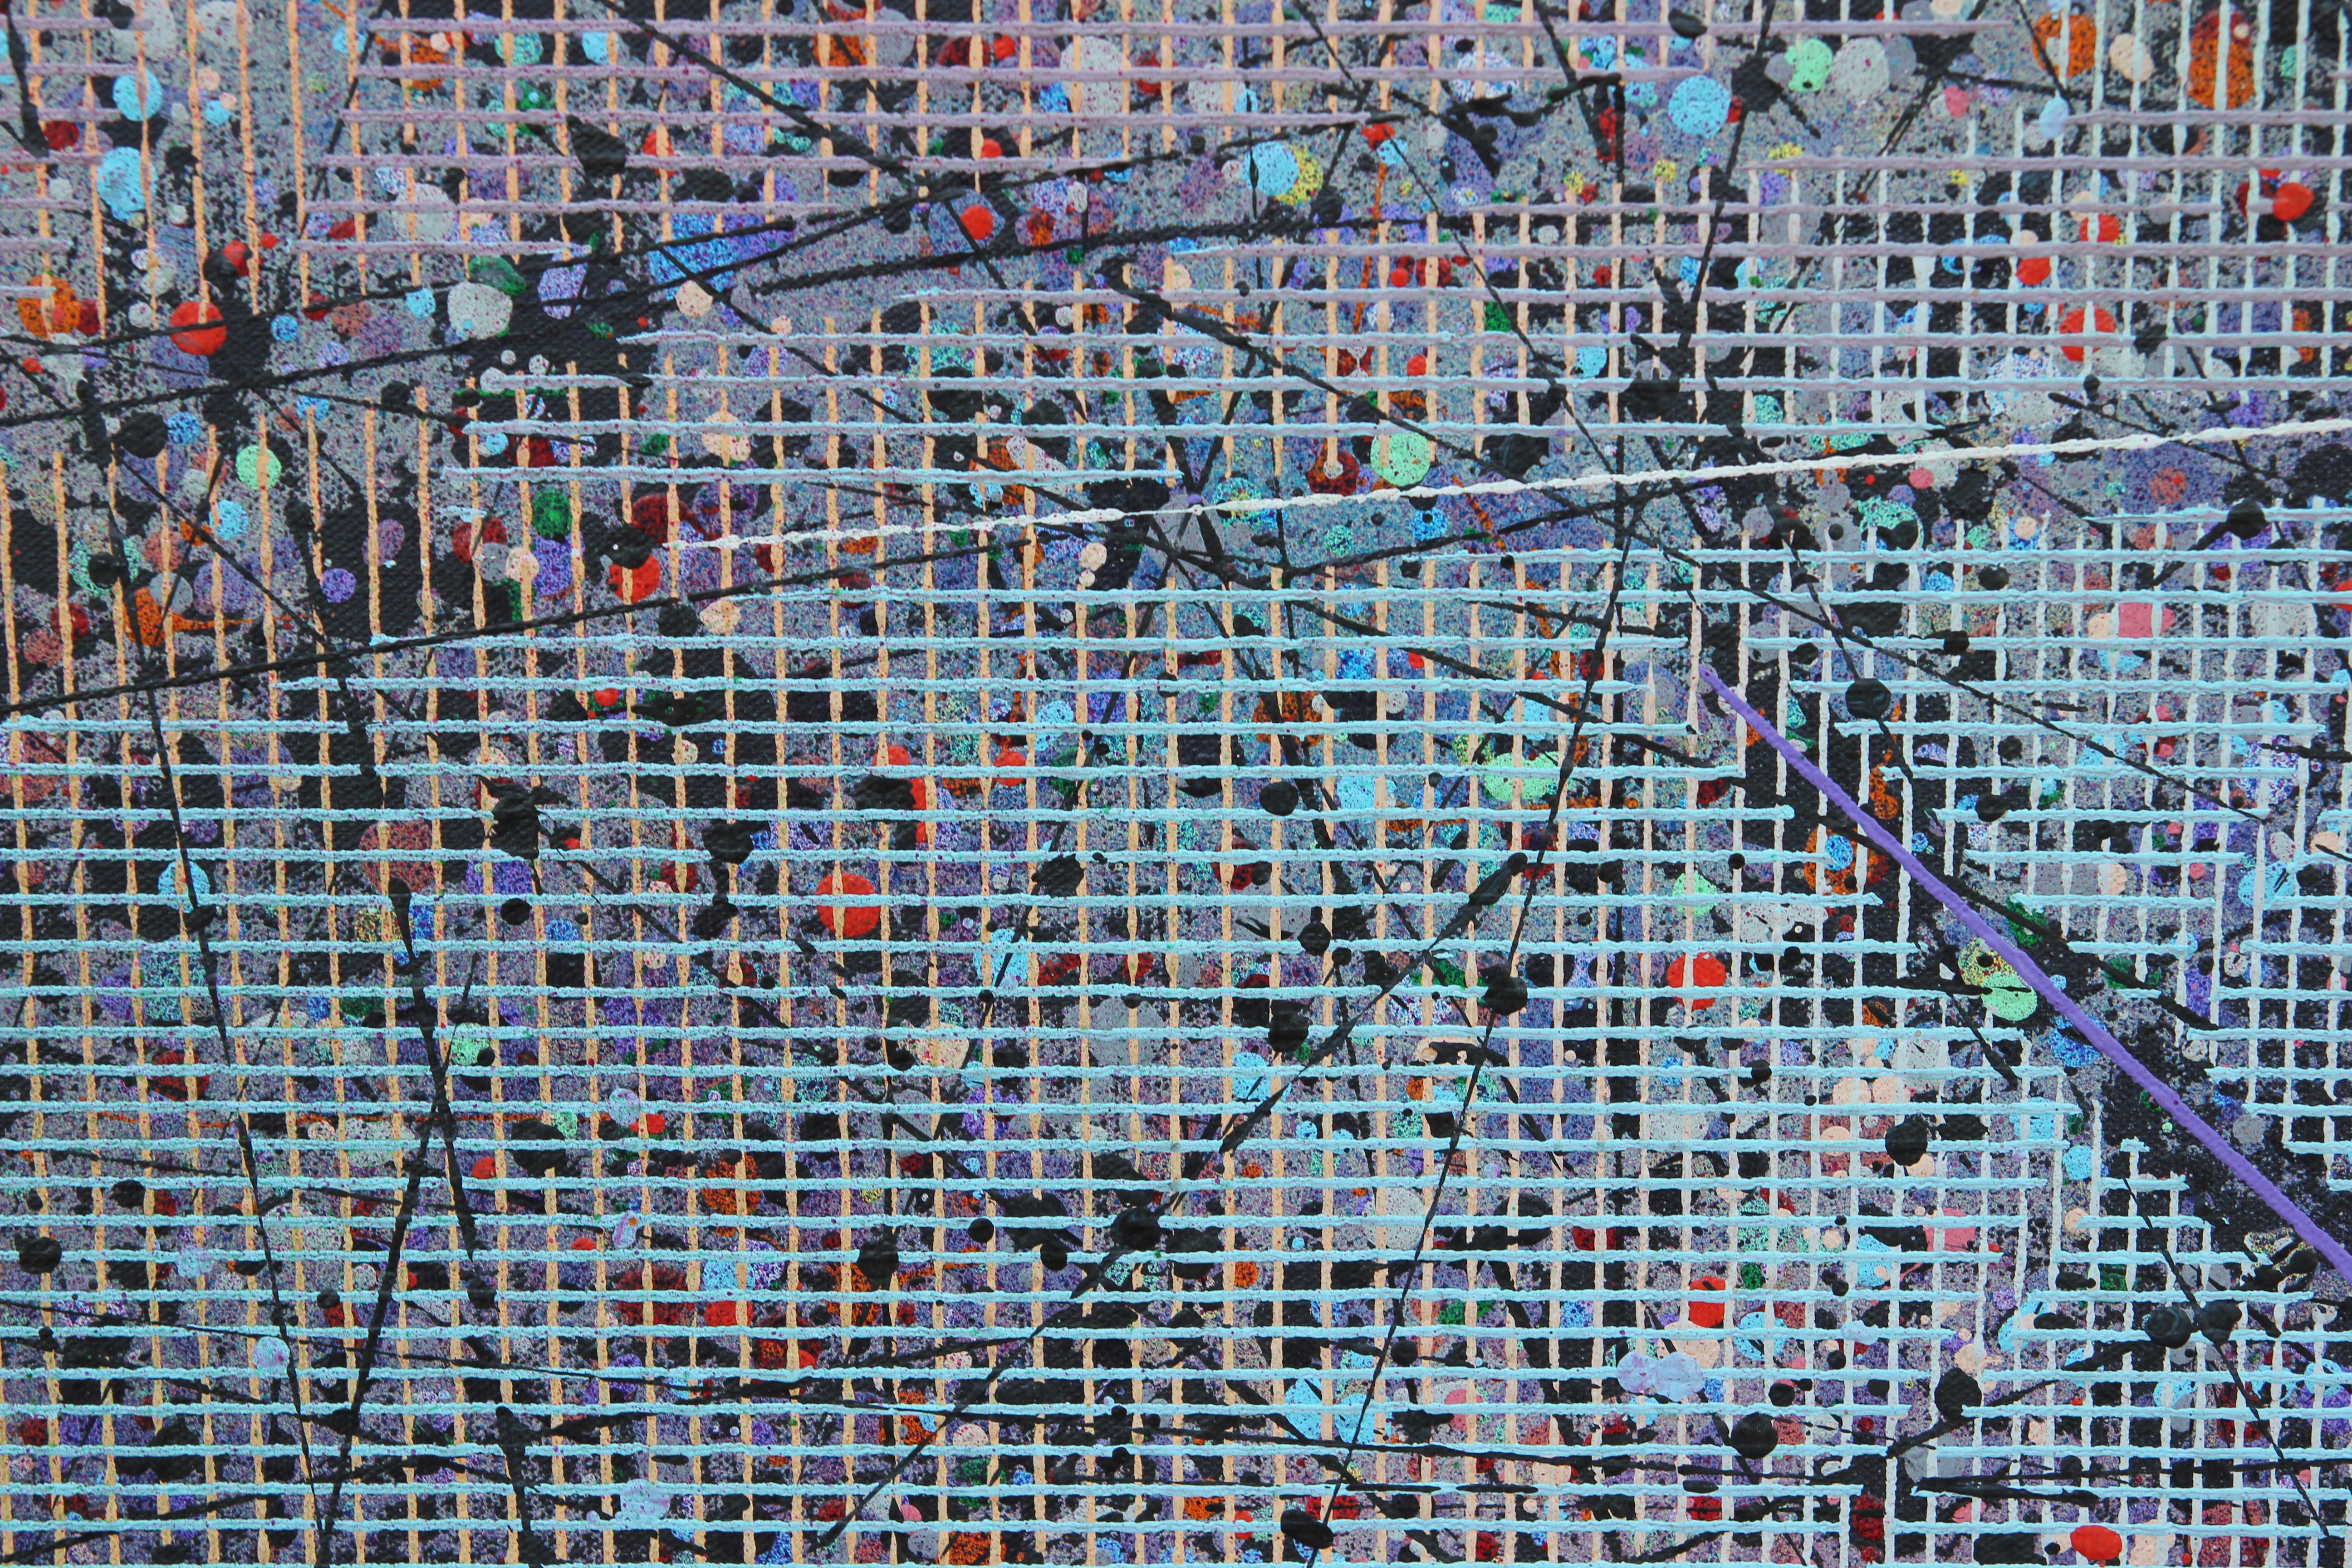 Large purple and blue tonal linear abstract painting was done in an expressionist style. Within the work is a network of grids, a style known to be used by Paul Maxwell. The piece is signed, titled and dated on the back of the board. The work is not